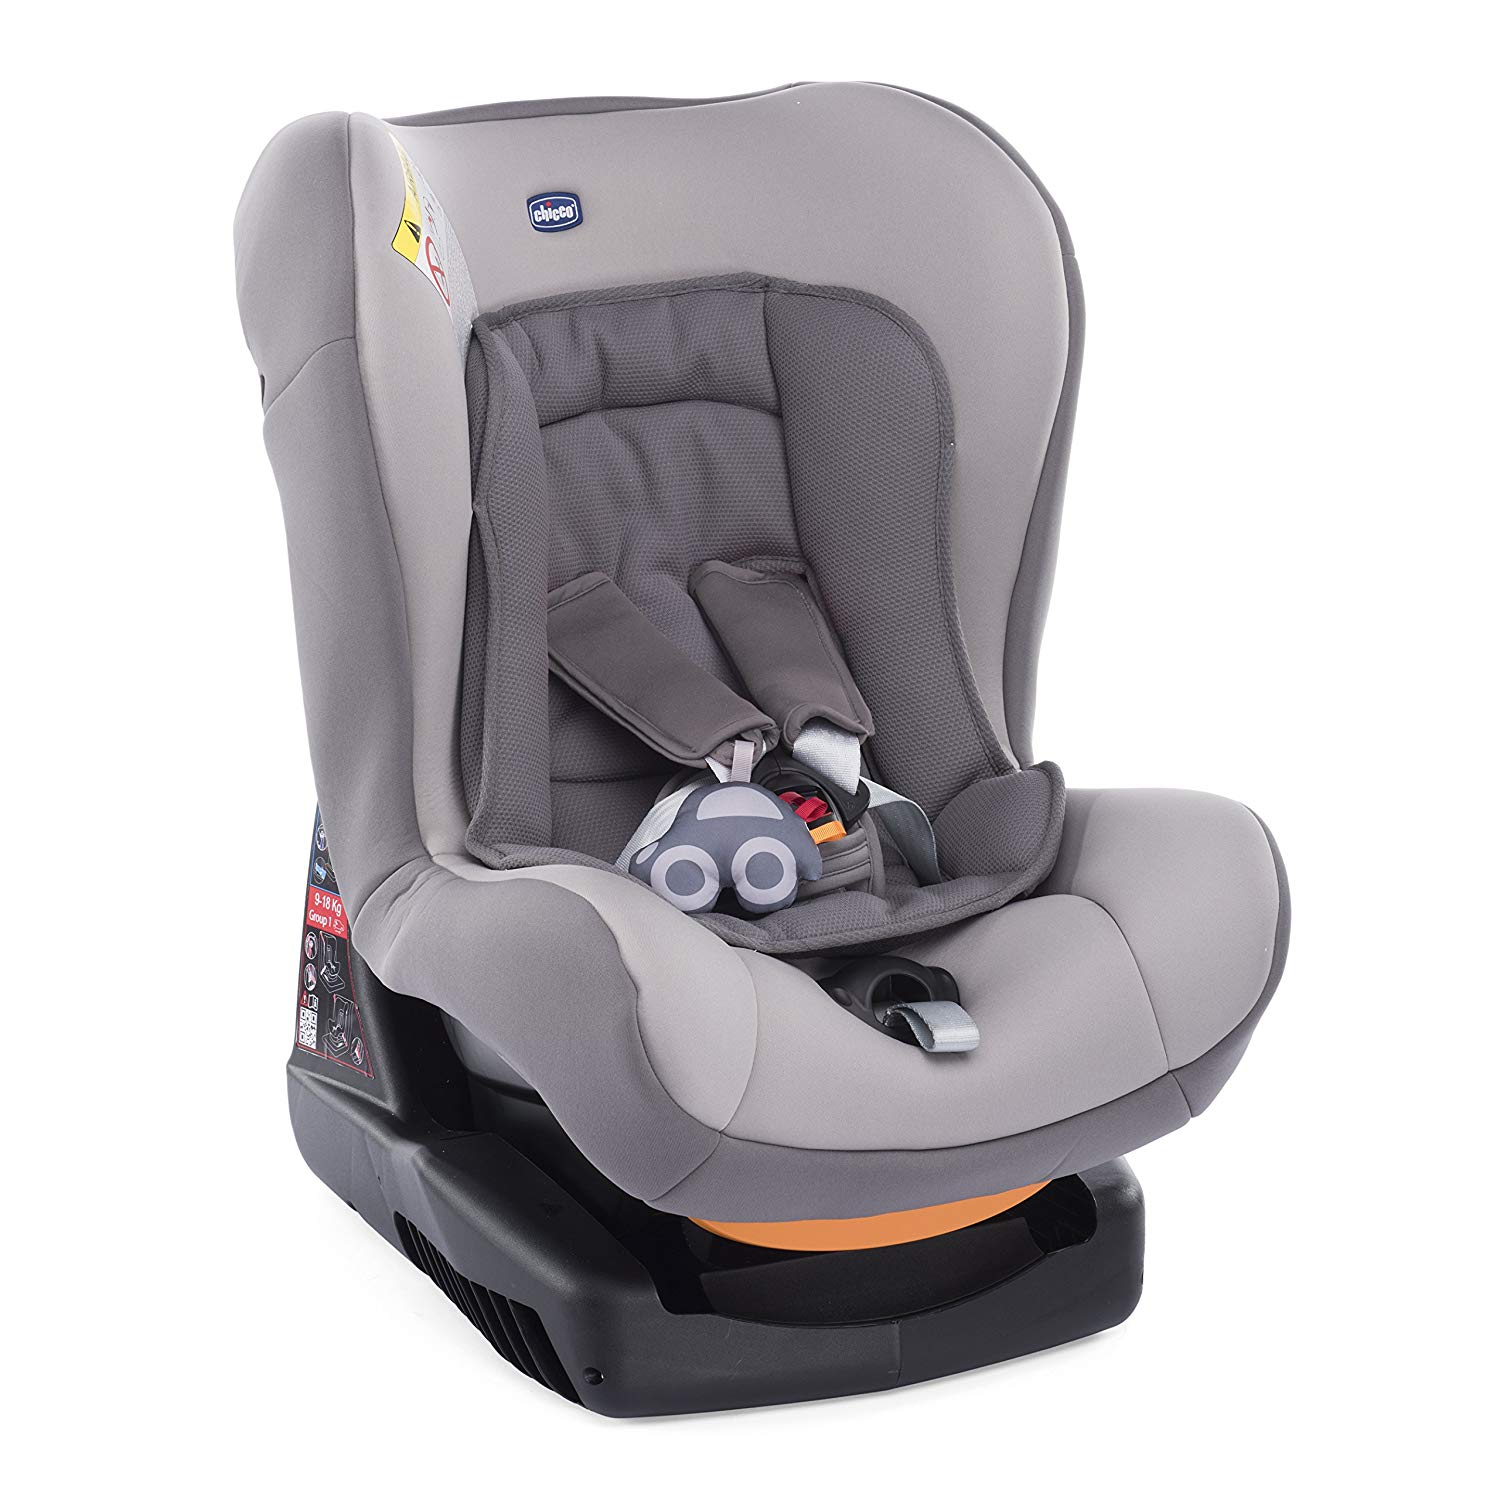 Cosmos Chicco Child Car Seat Size 0 +/1, Elegance